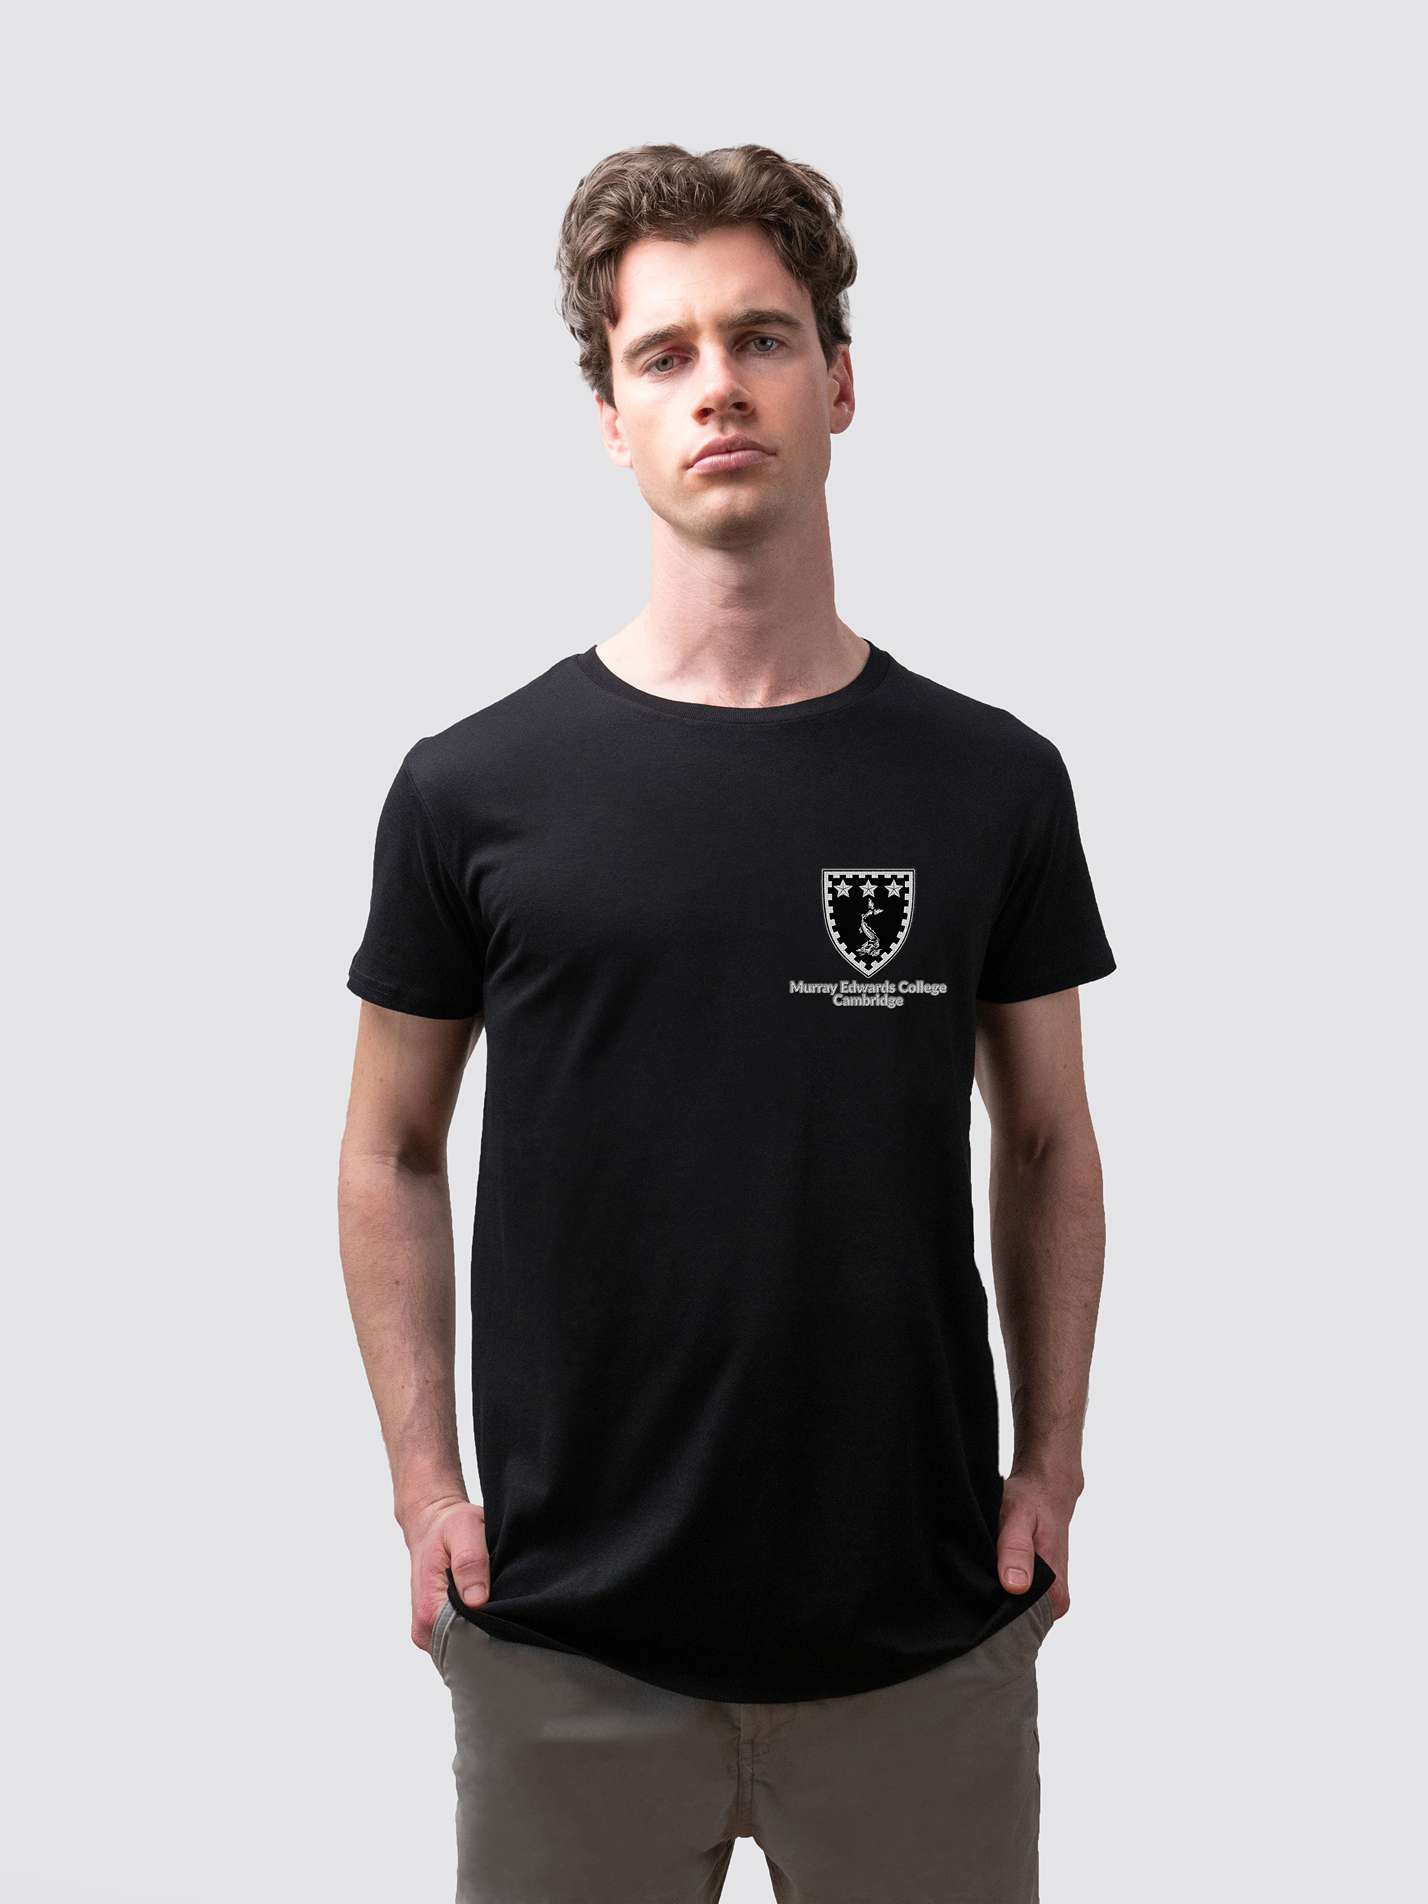 Sustainable Murray Edwards t-shirt, made from organic cotton